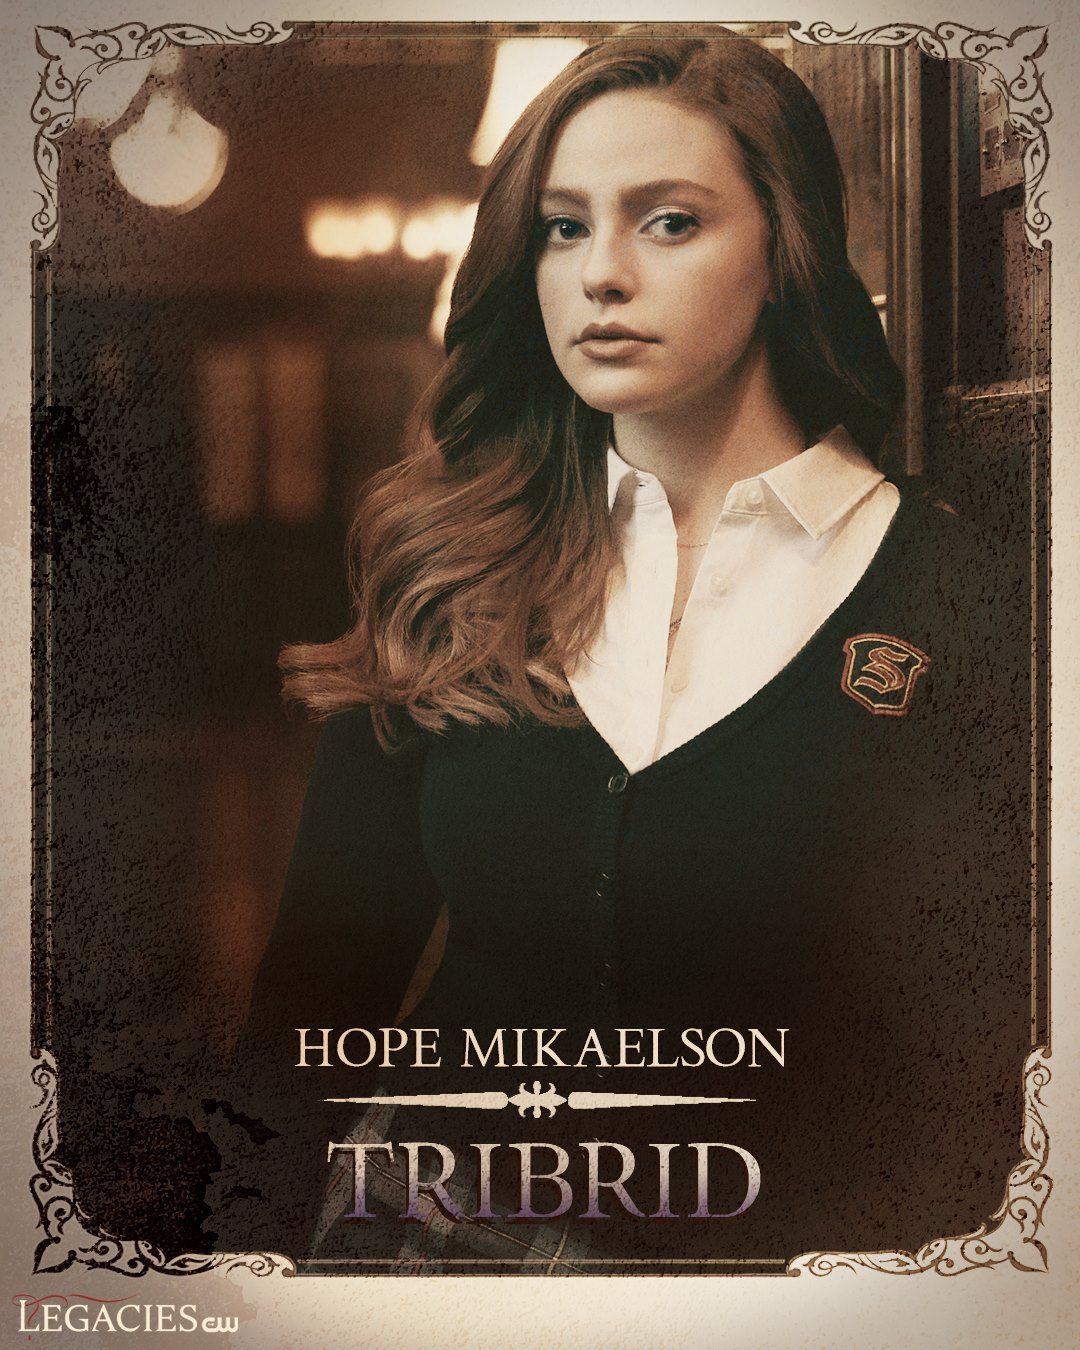 Hope Mikaelson. Tribrid. Legacy tv series, Vampire diaries the originals, Hope mikaelson